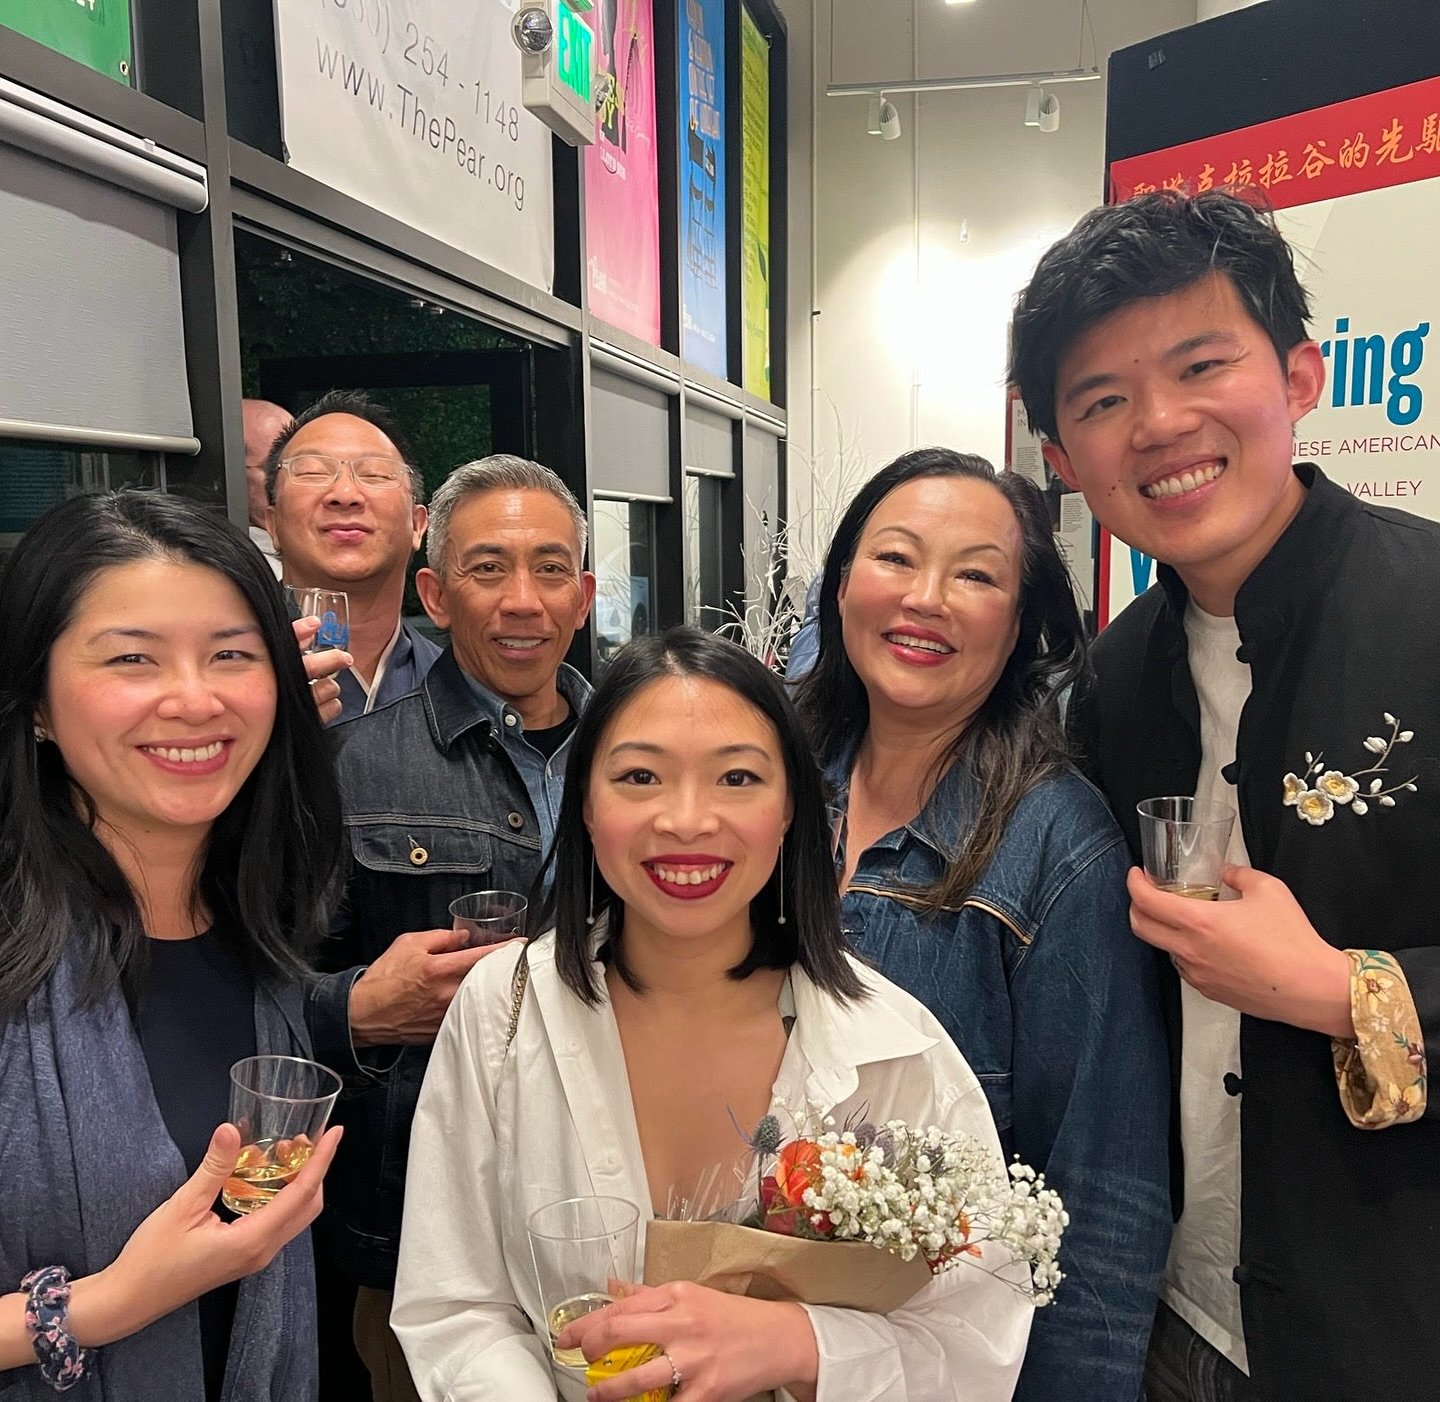 Happy closing to the cast, crew and creative team of &lsquo;The Chinese Lady&rsquo;!

This magical, moving and powerful production exploring Asian American history and culture continues to deeply inspire and resonate with us this AAPI heritage month 